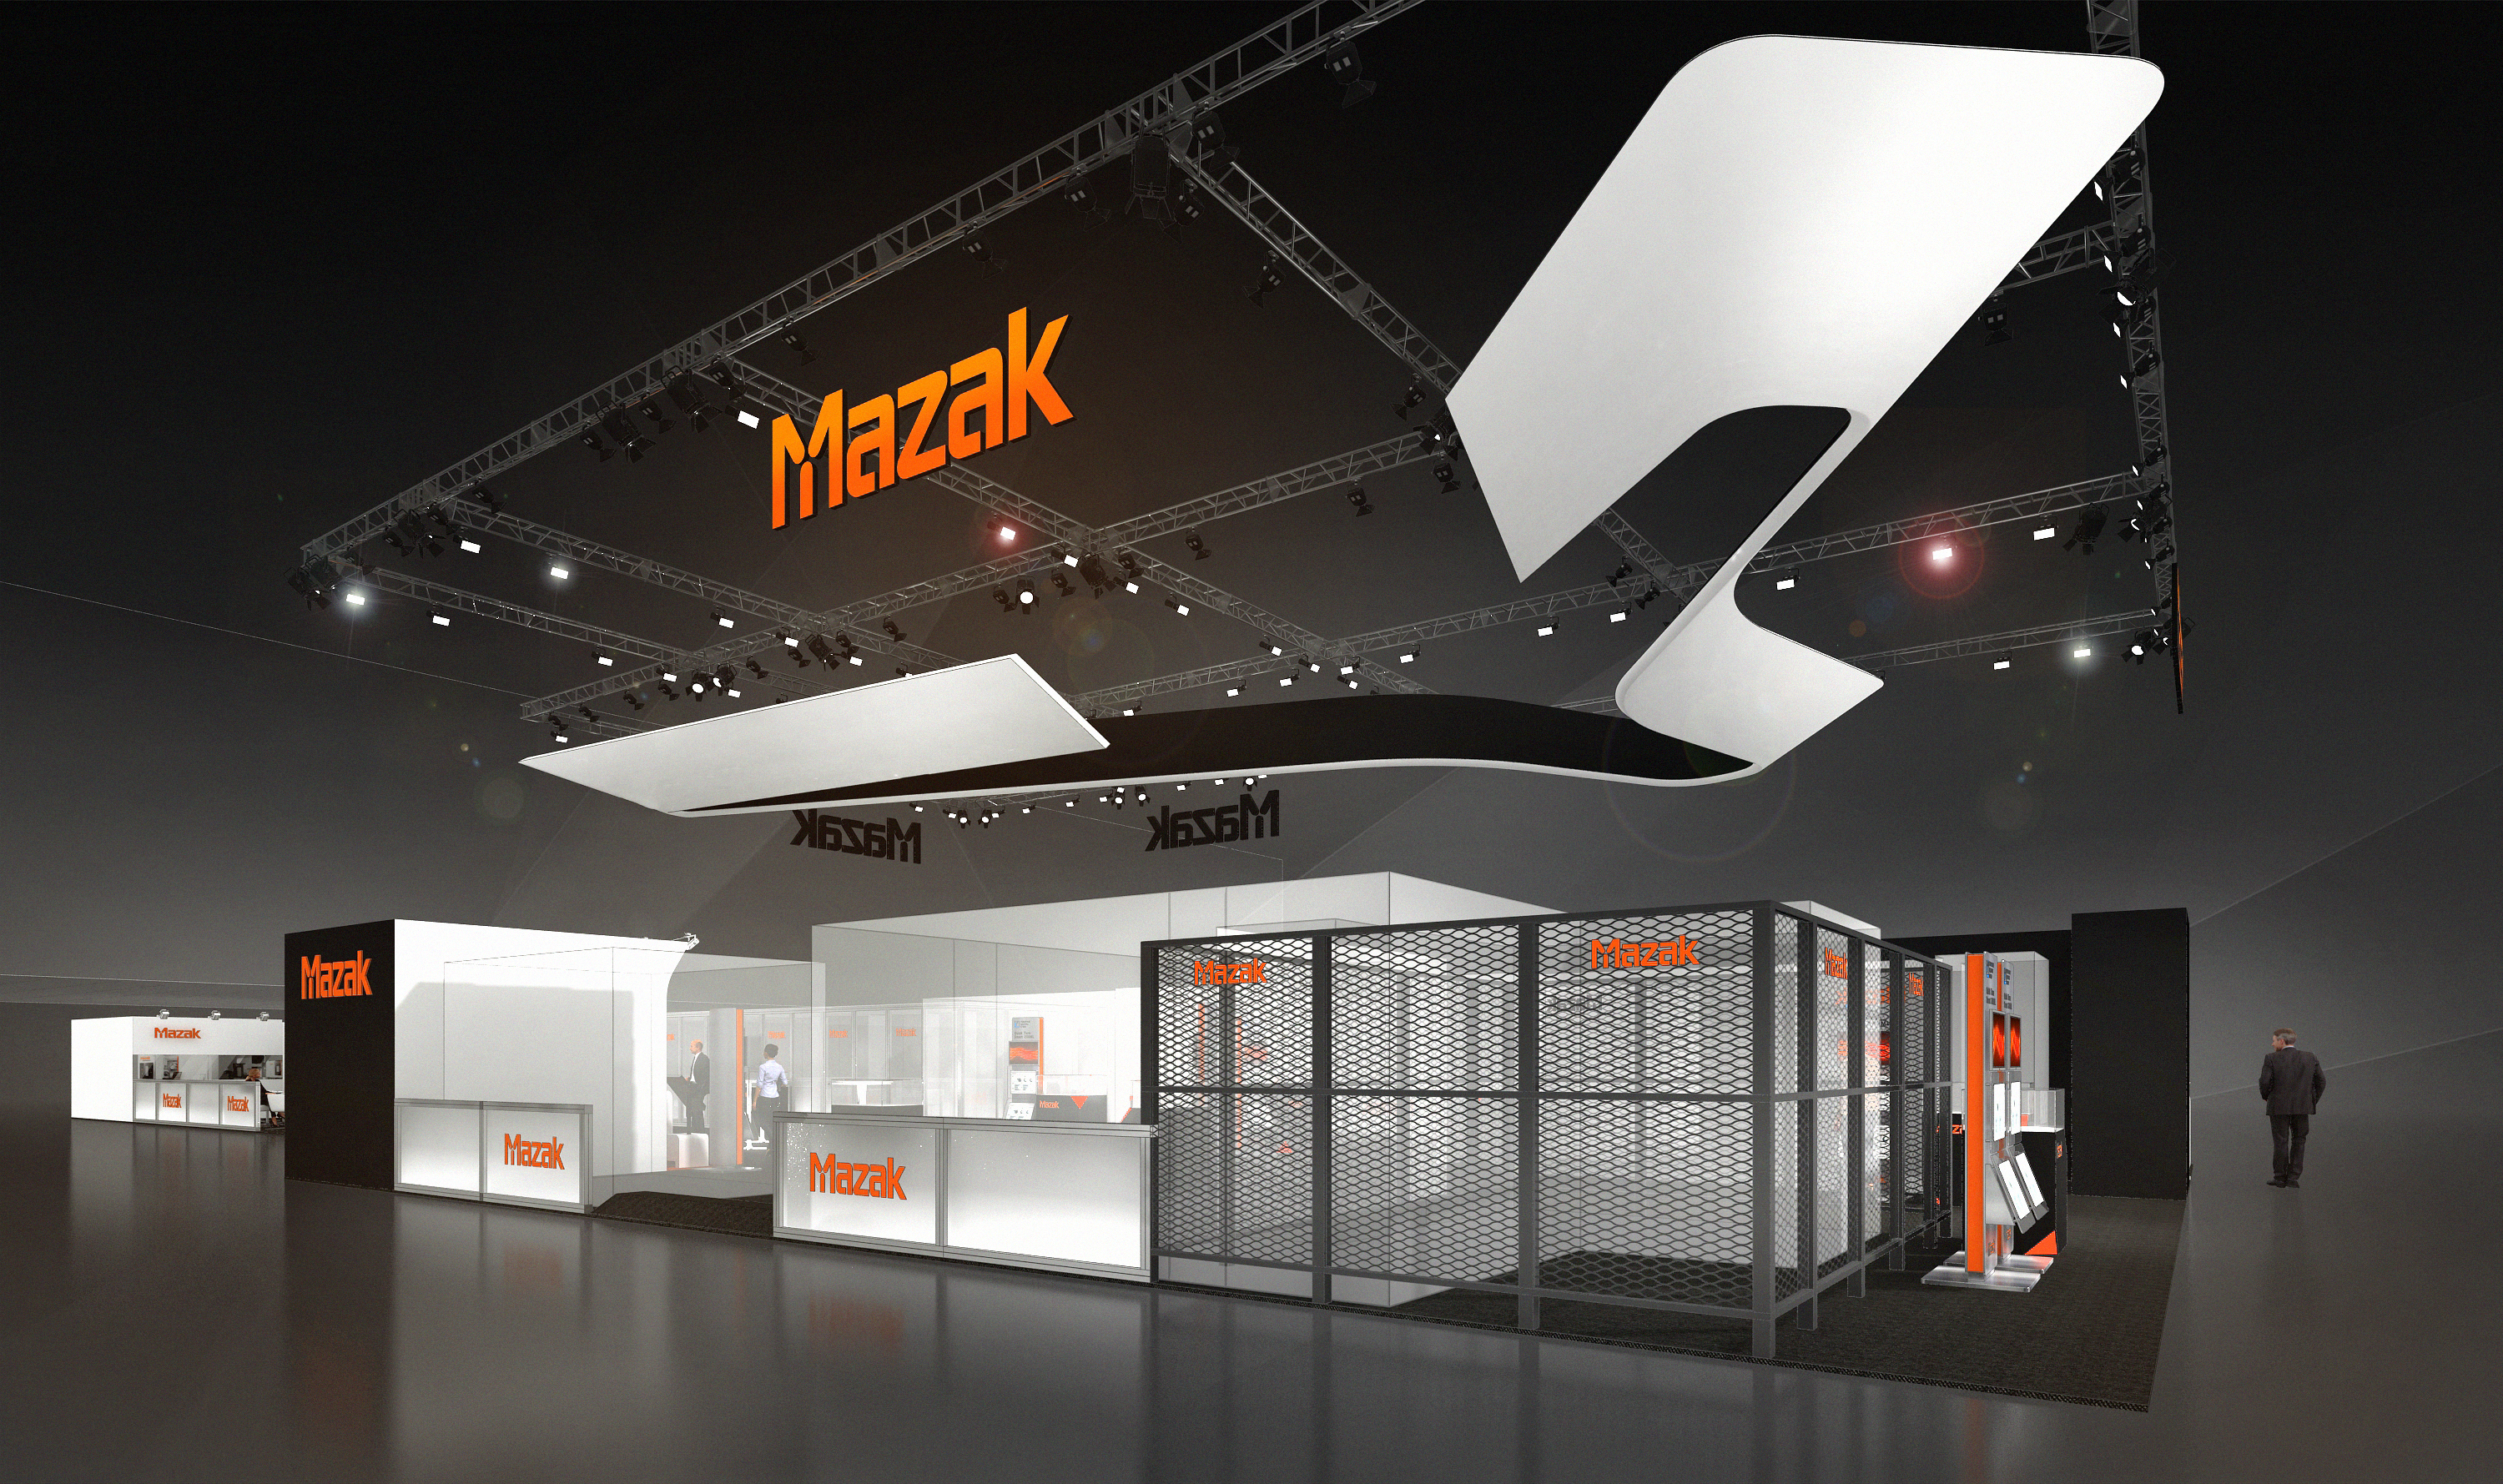 Stand project. Mazak стенд выставка. Шоу рум мазак. Fight Exhibition Stand. Basic Stand Exhibition.